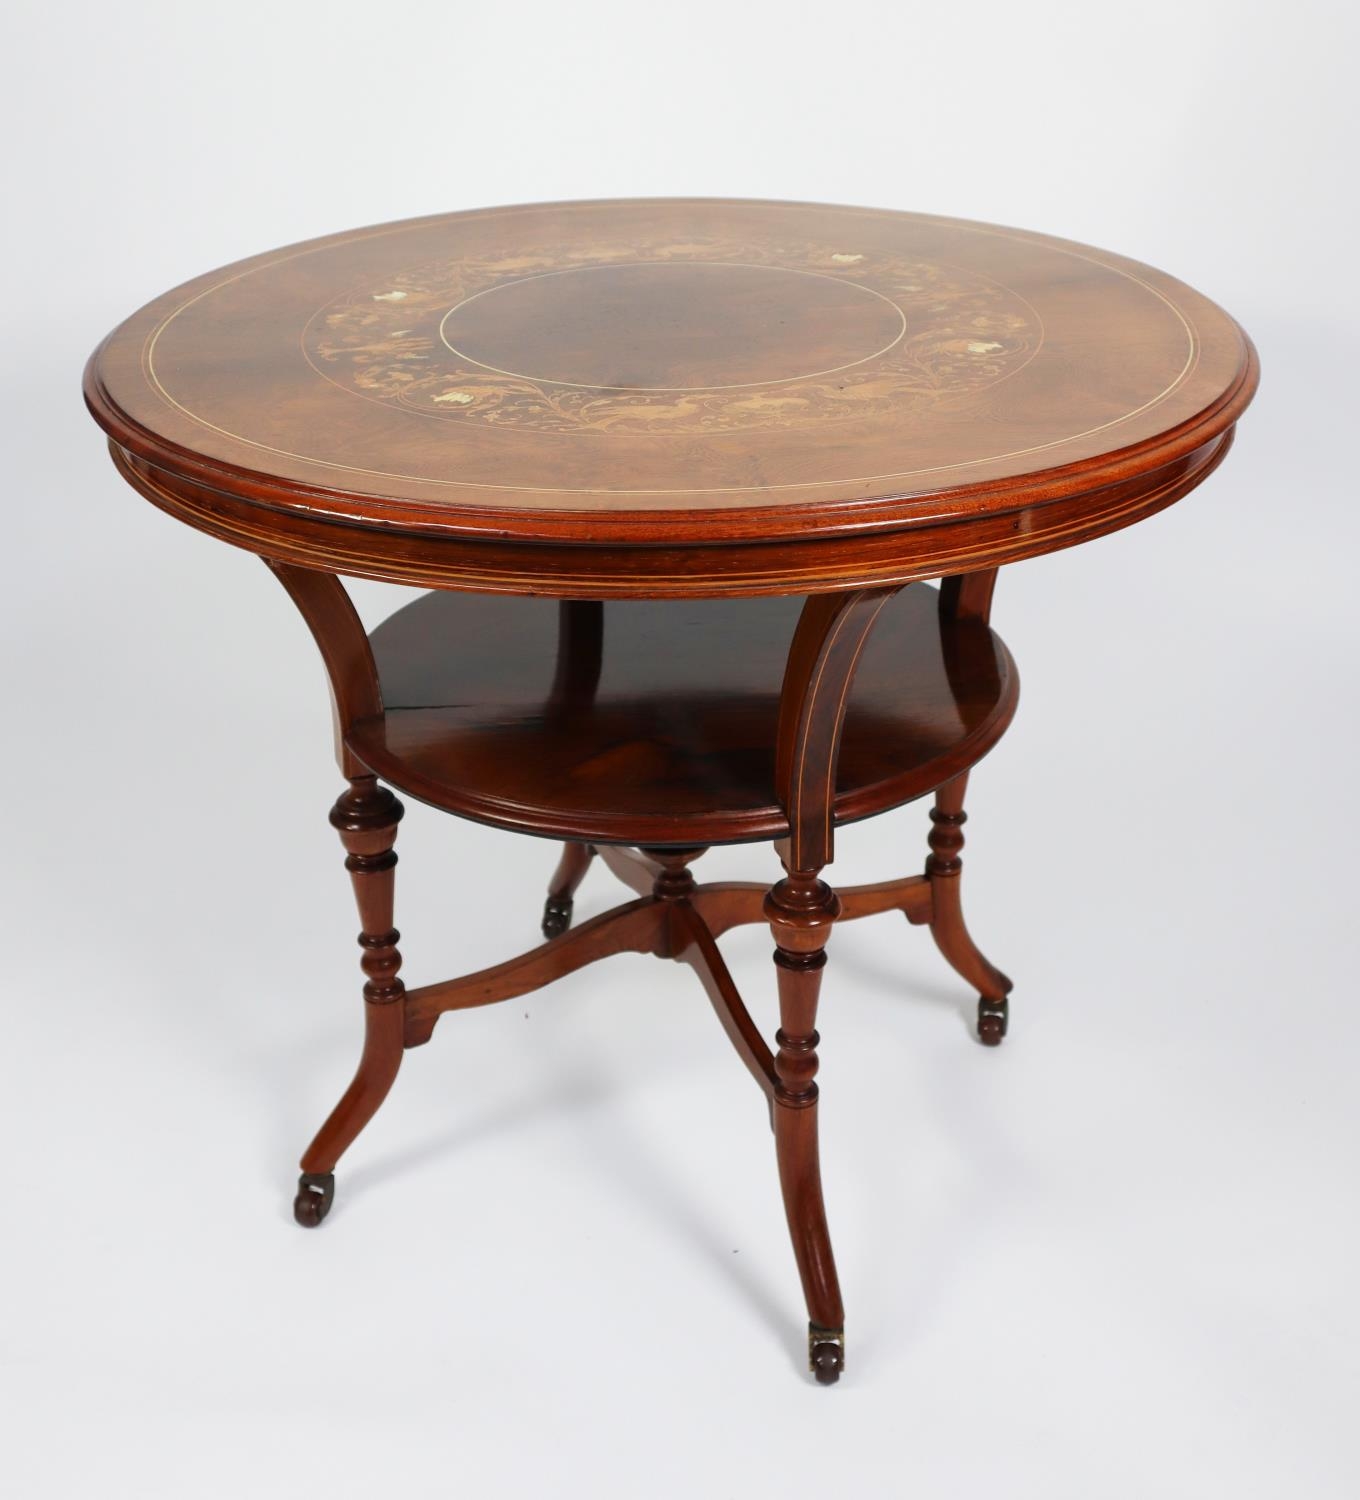 GOOD QUALITY EARLY TWENTIETH CENTURY IVORY AND BOXWOOD INLAID ROSEWOOD OCCASIONAL TABLE, the moulded